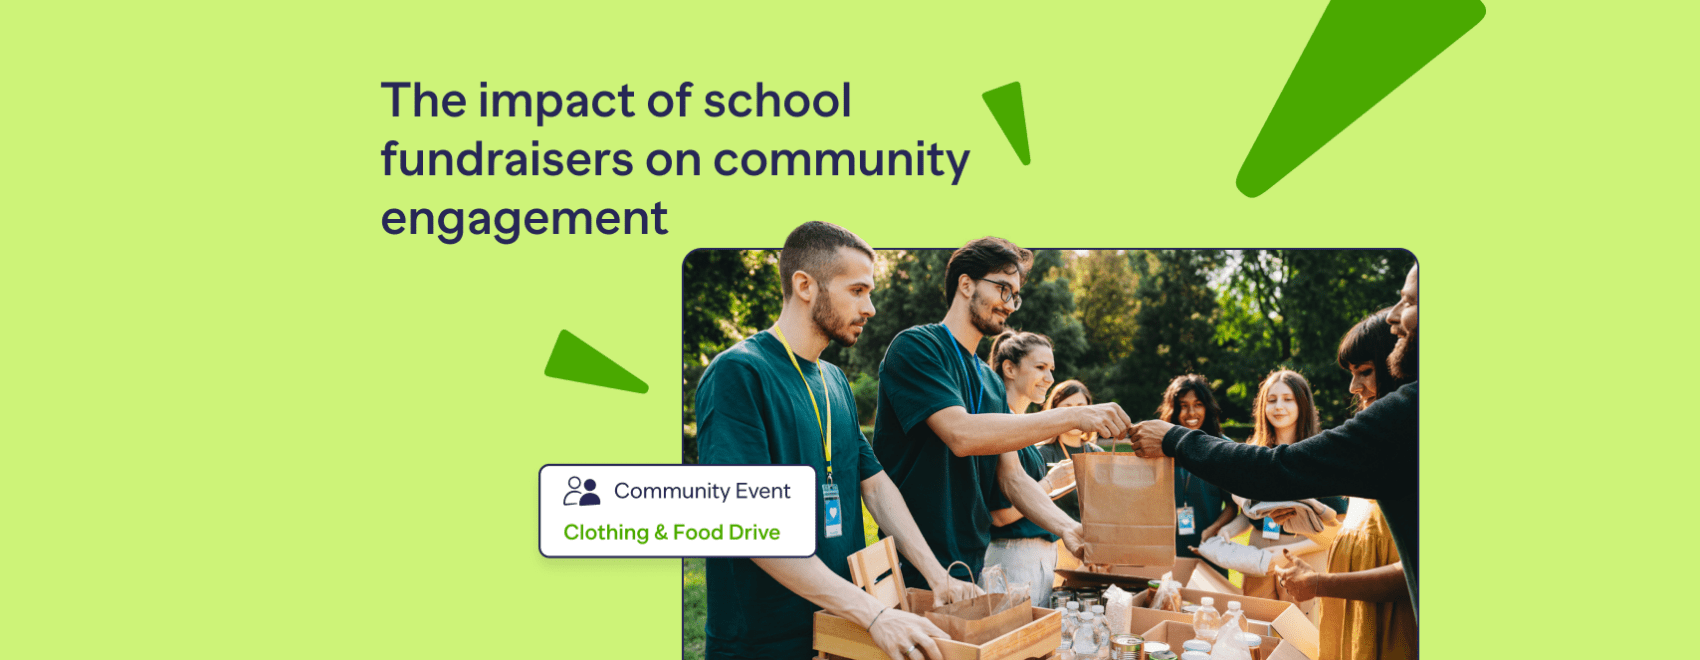 The impact of school fundraisers on community engagement